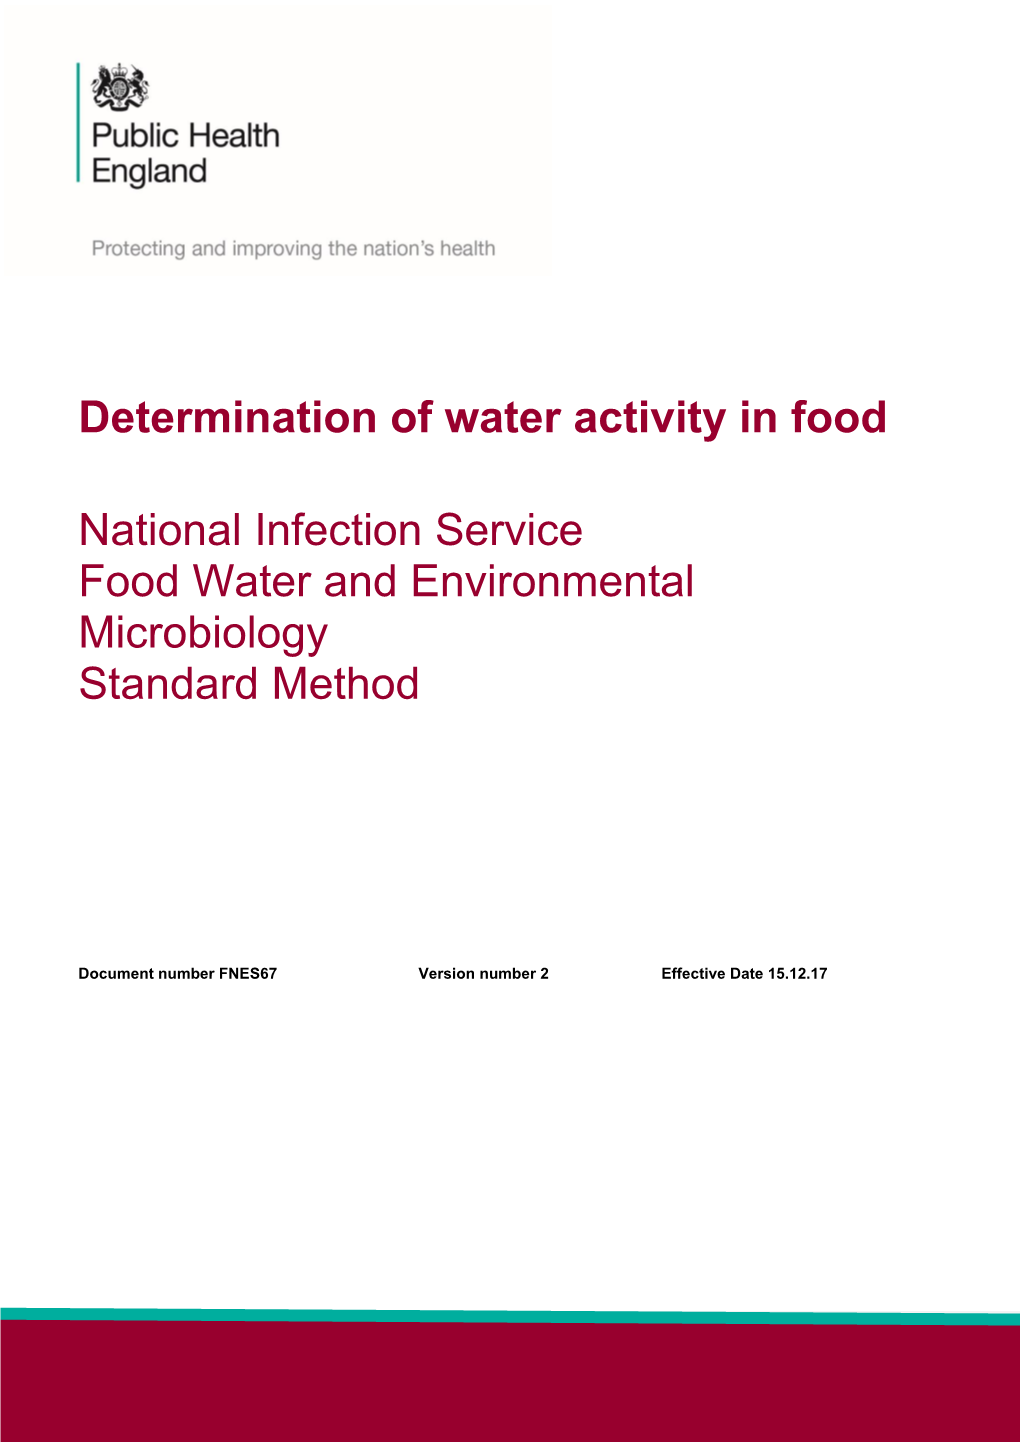 Determination of Water Activity in Food